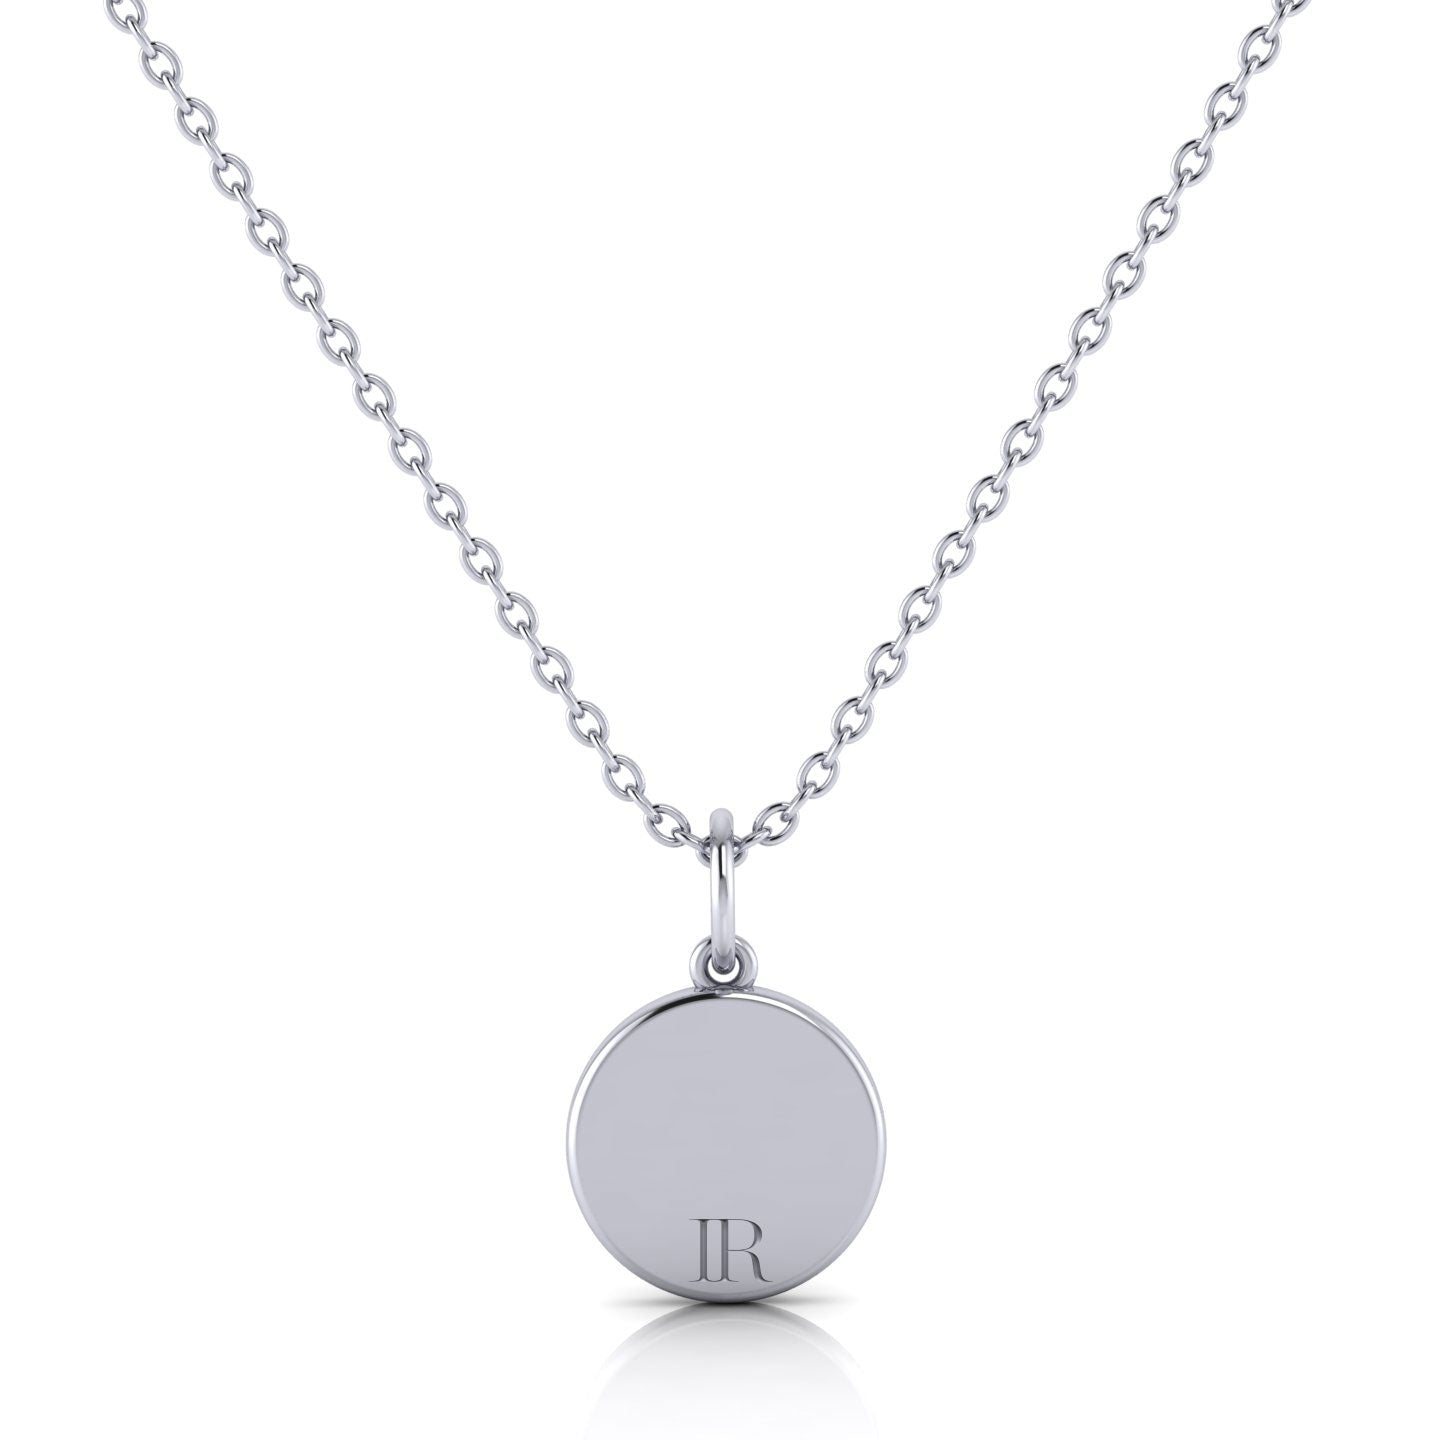 The back view of an Emory University Circle Pendant in sterling silver. The pendant is a circle with the Emory University seal engraved in the center. The silver is a bright white color.